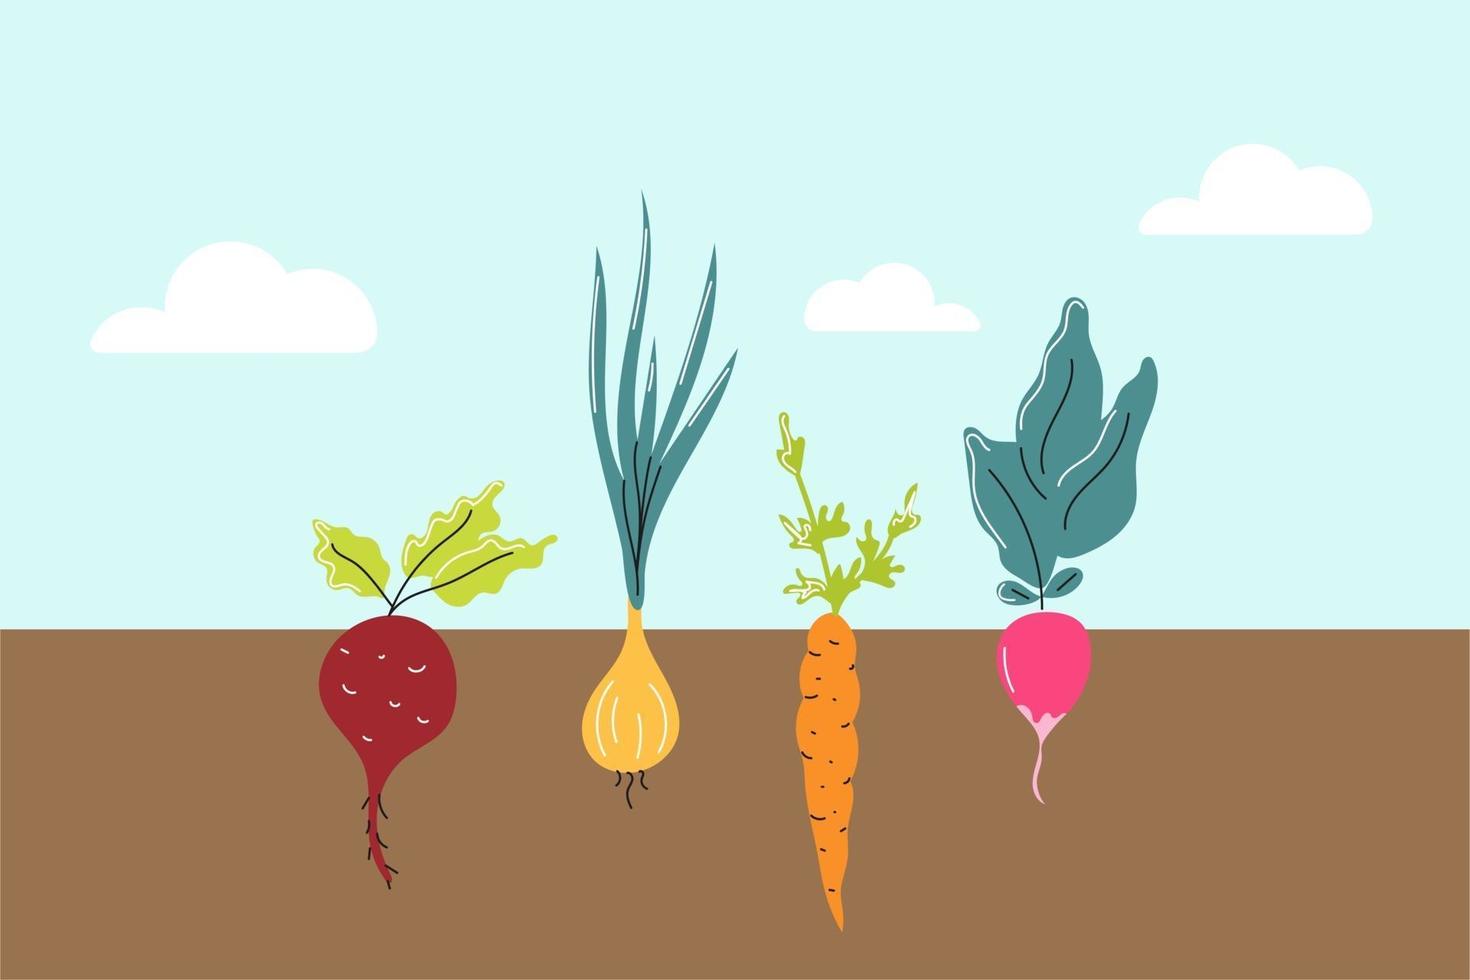 Vegetables garden. Horizontal image. Beetroot, onions, carrots and radishes grow in the ground. Vector flat image